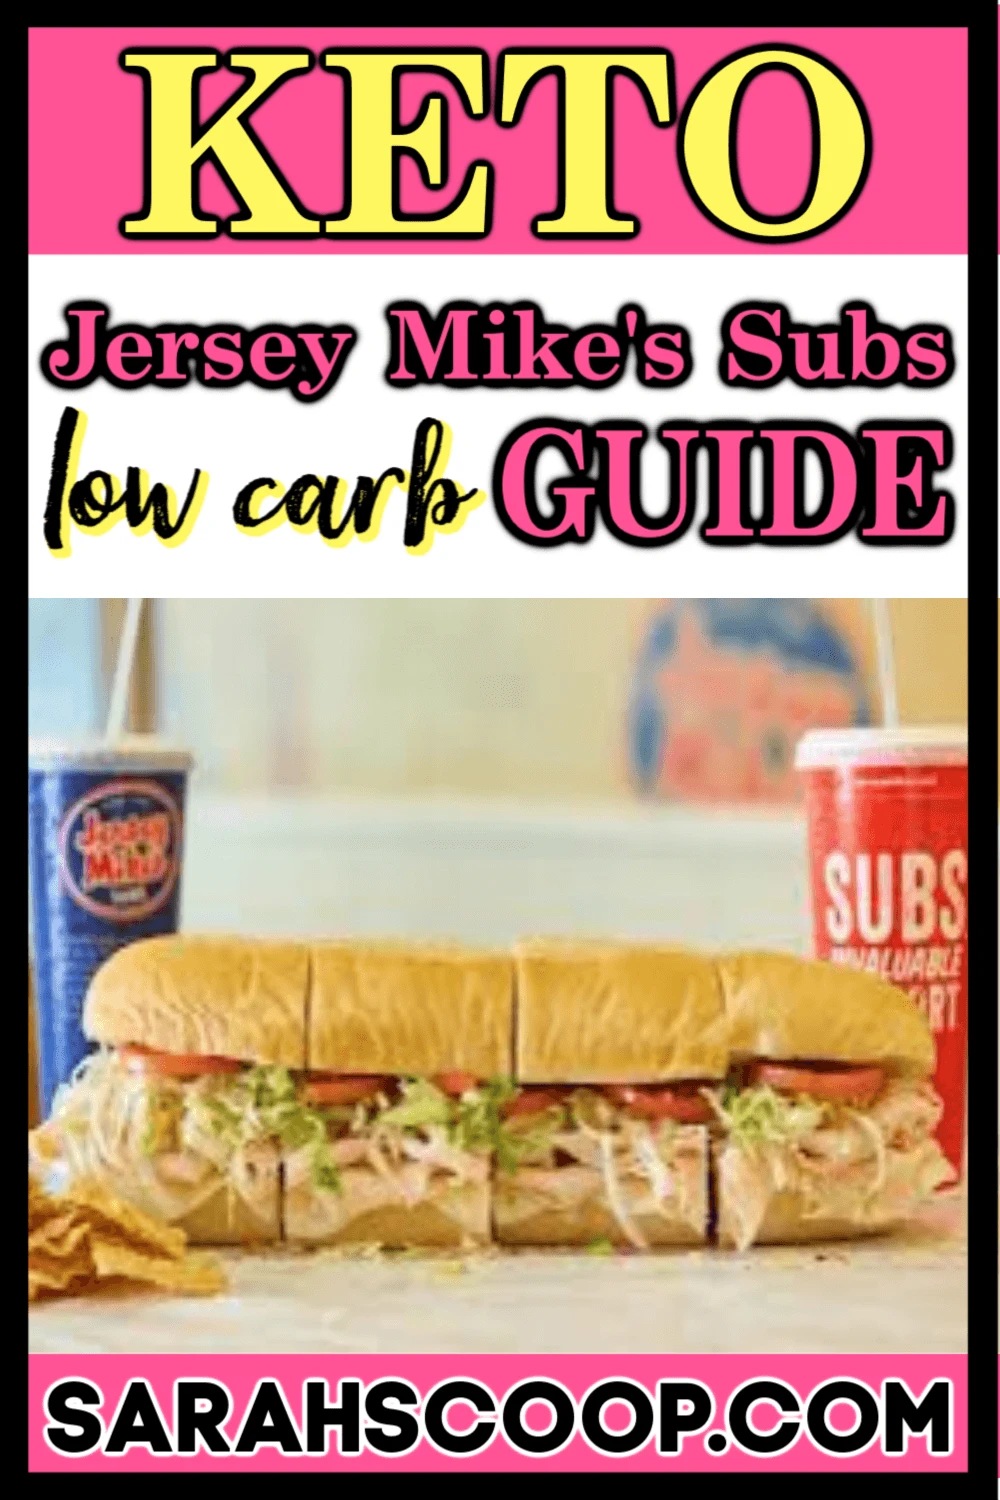 jersey mikes keto